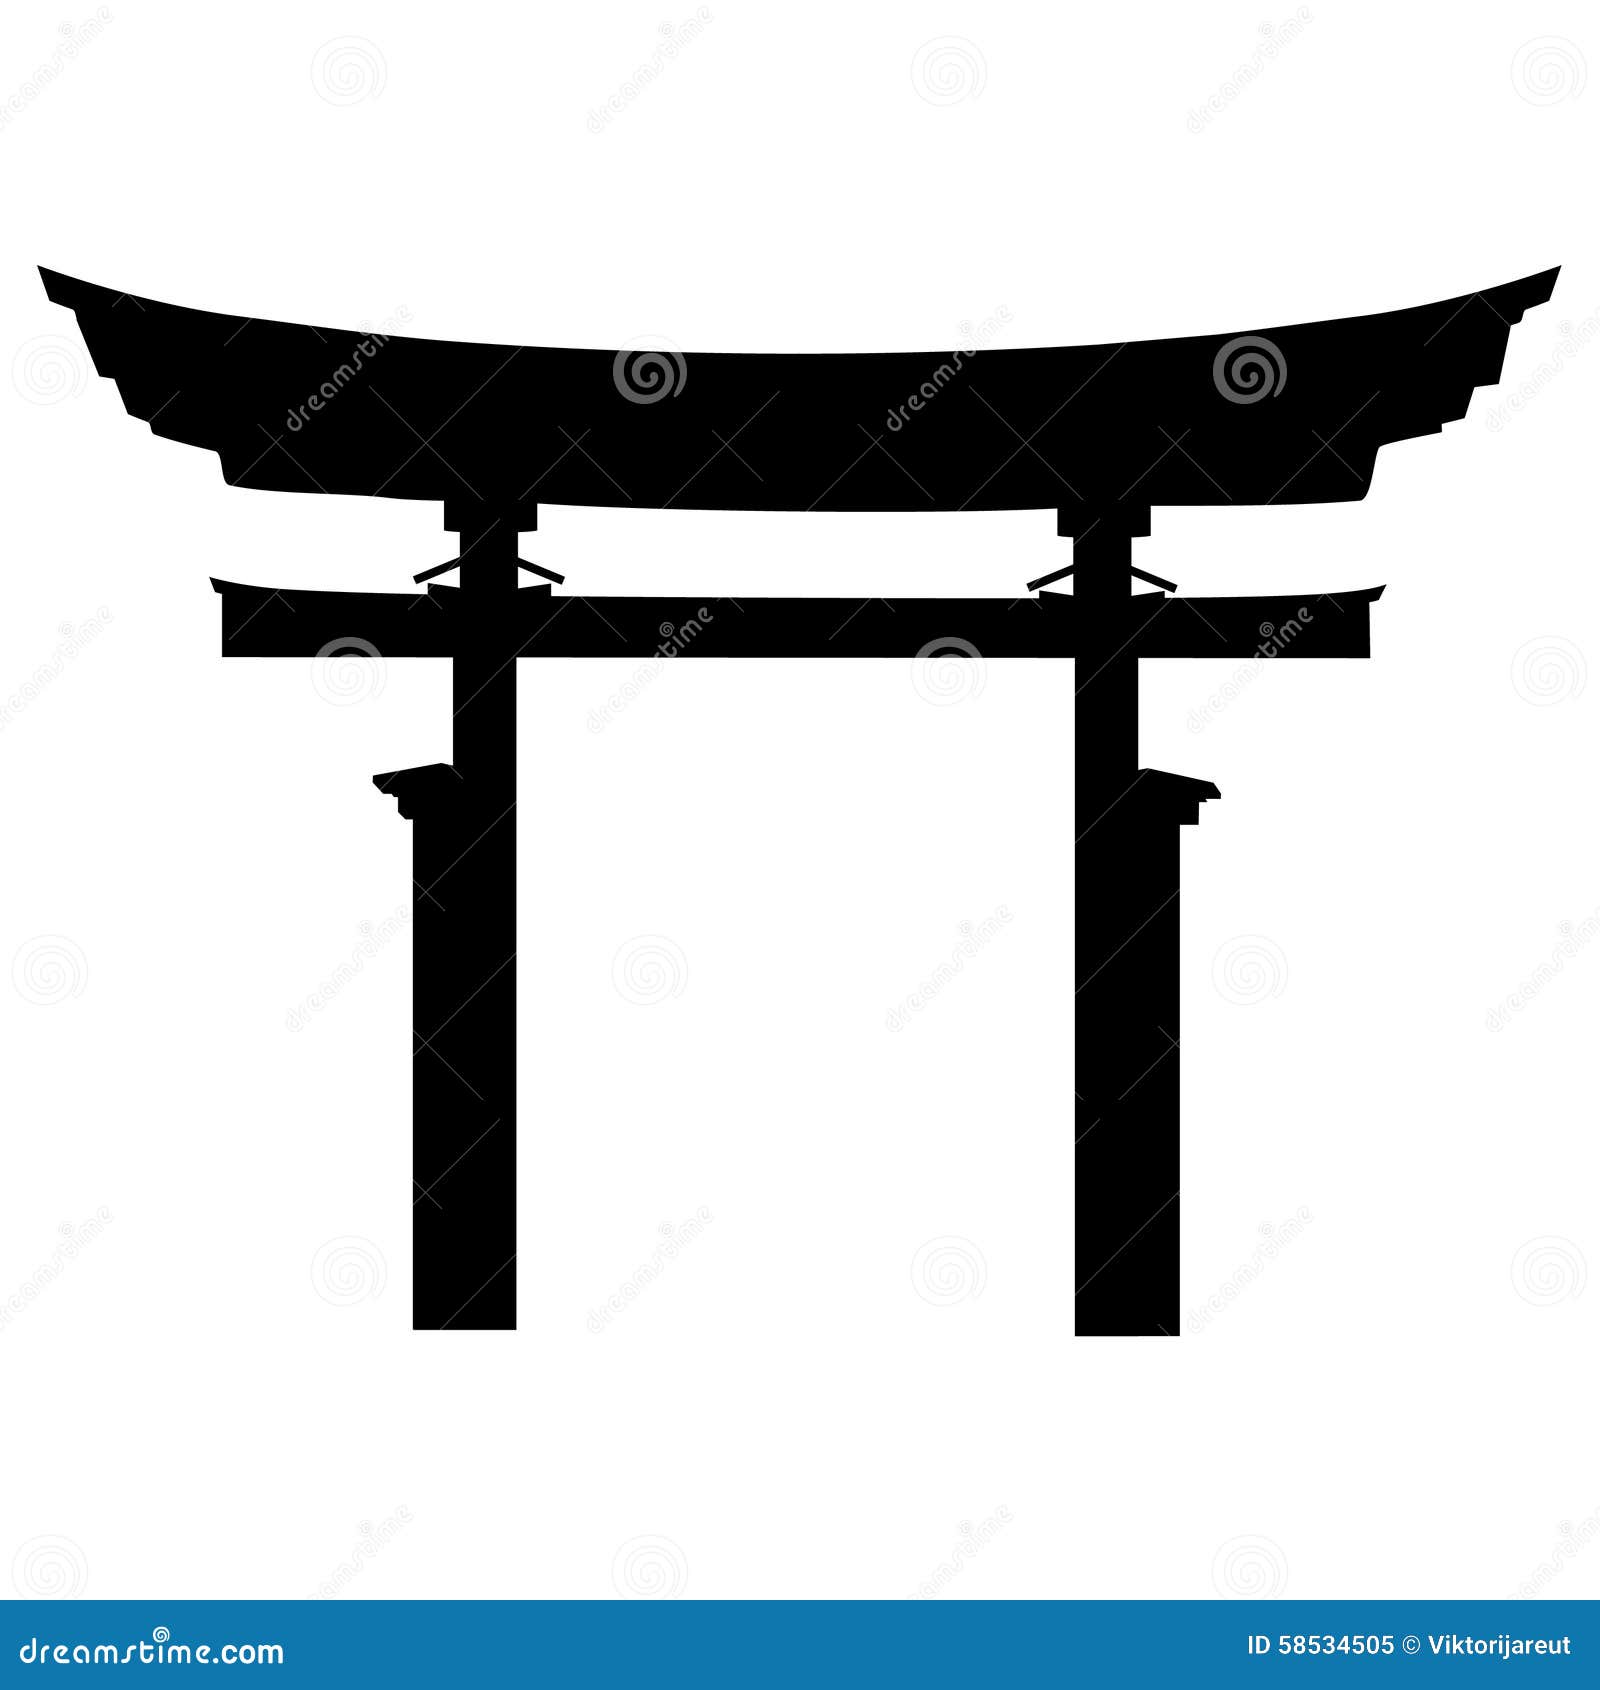 torii gate silhouette vector illustration black japanese japanese culture traditional culture 58534505